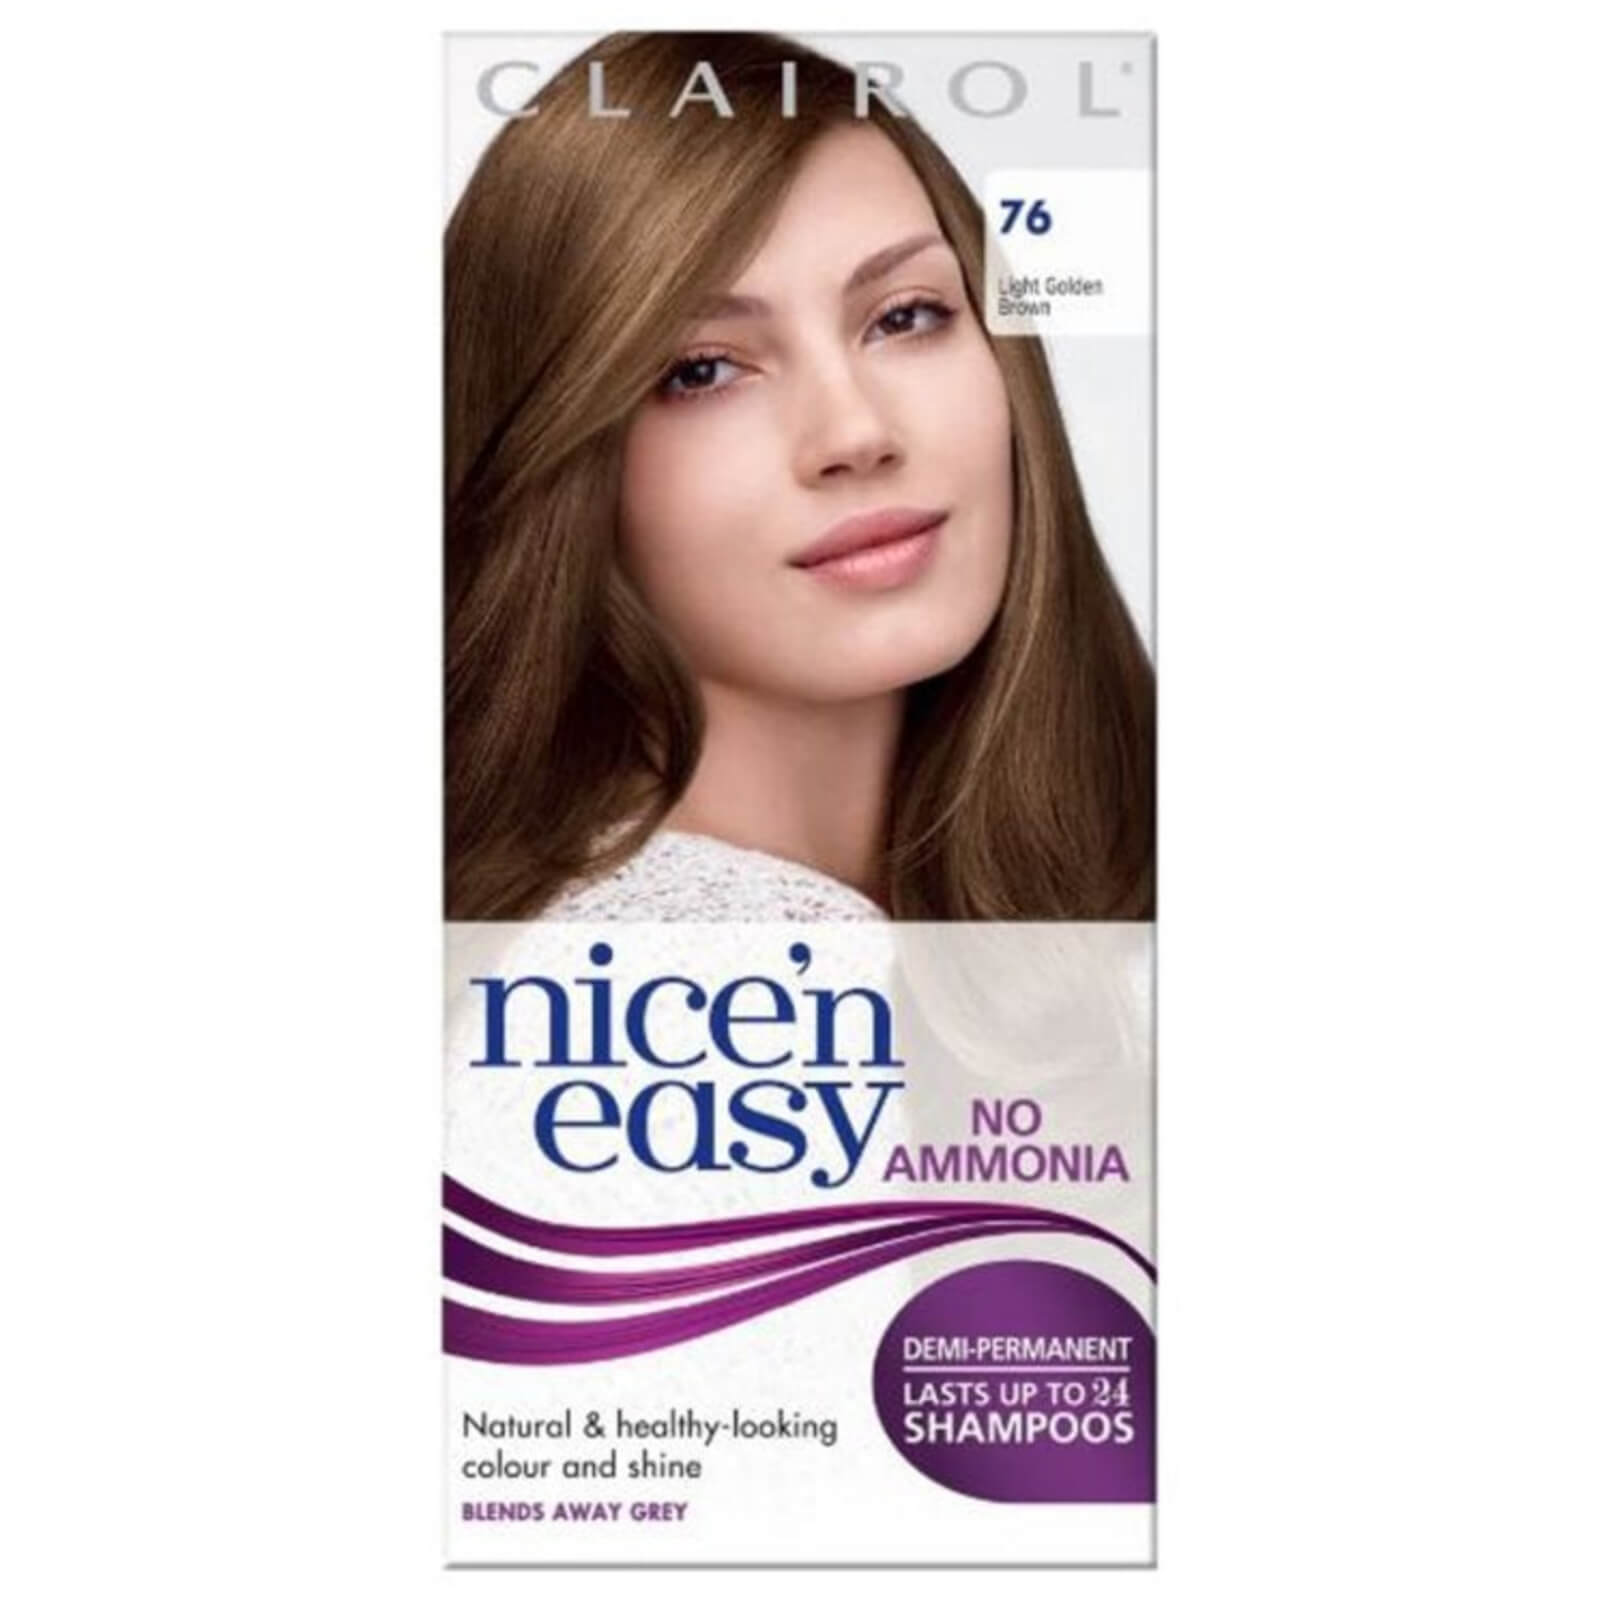 Clairol Nice'n Easy Semi-Permanent Hair Dye with No Ammonia (Various Shades) - 76 Light Golden Brown